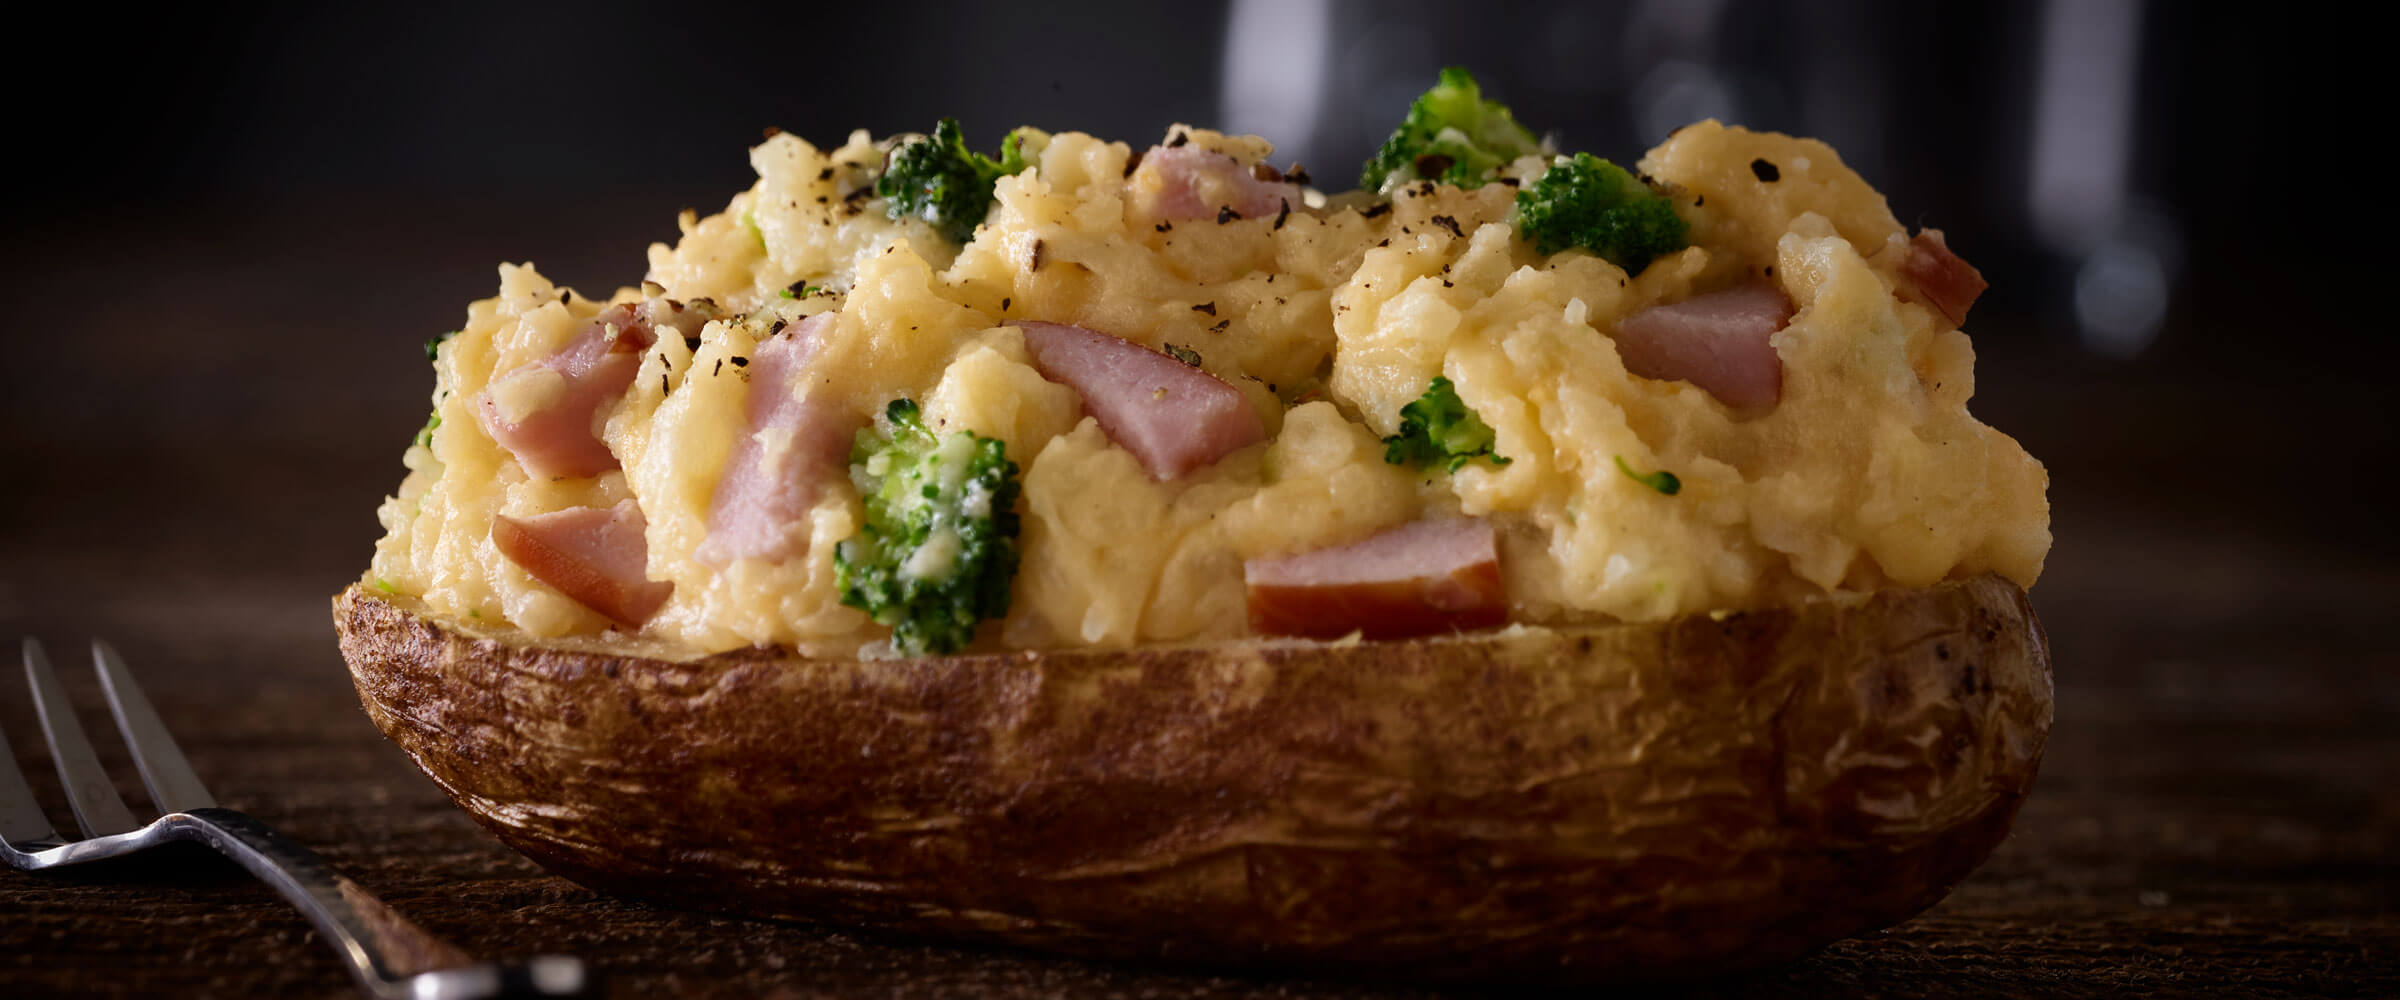 Twice Baked Potato with Canadian Bacon